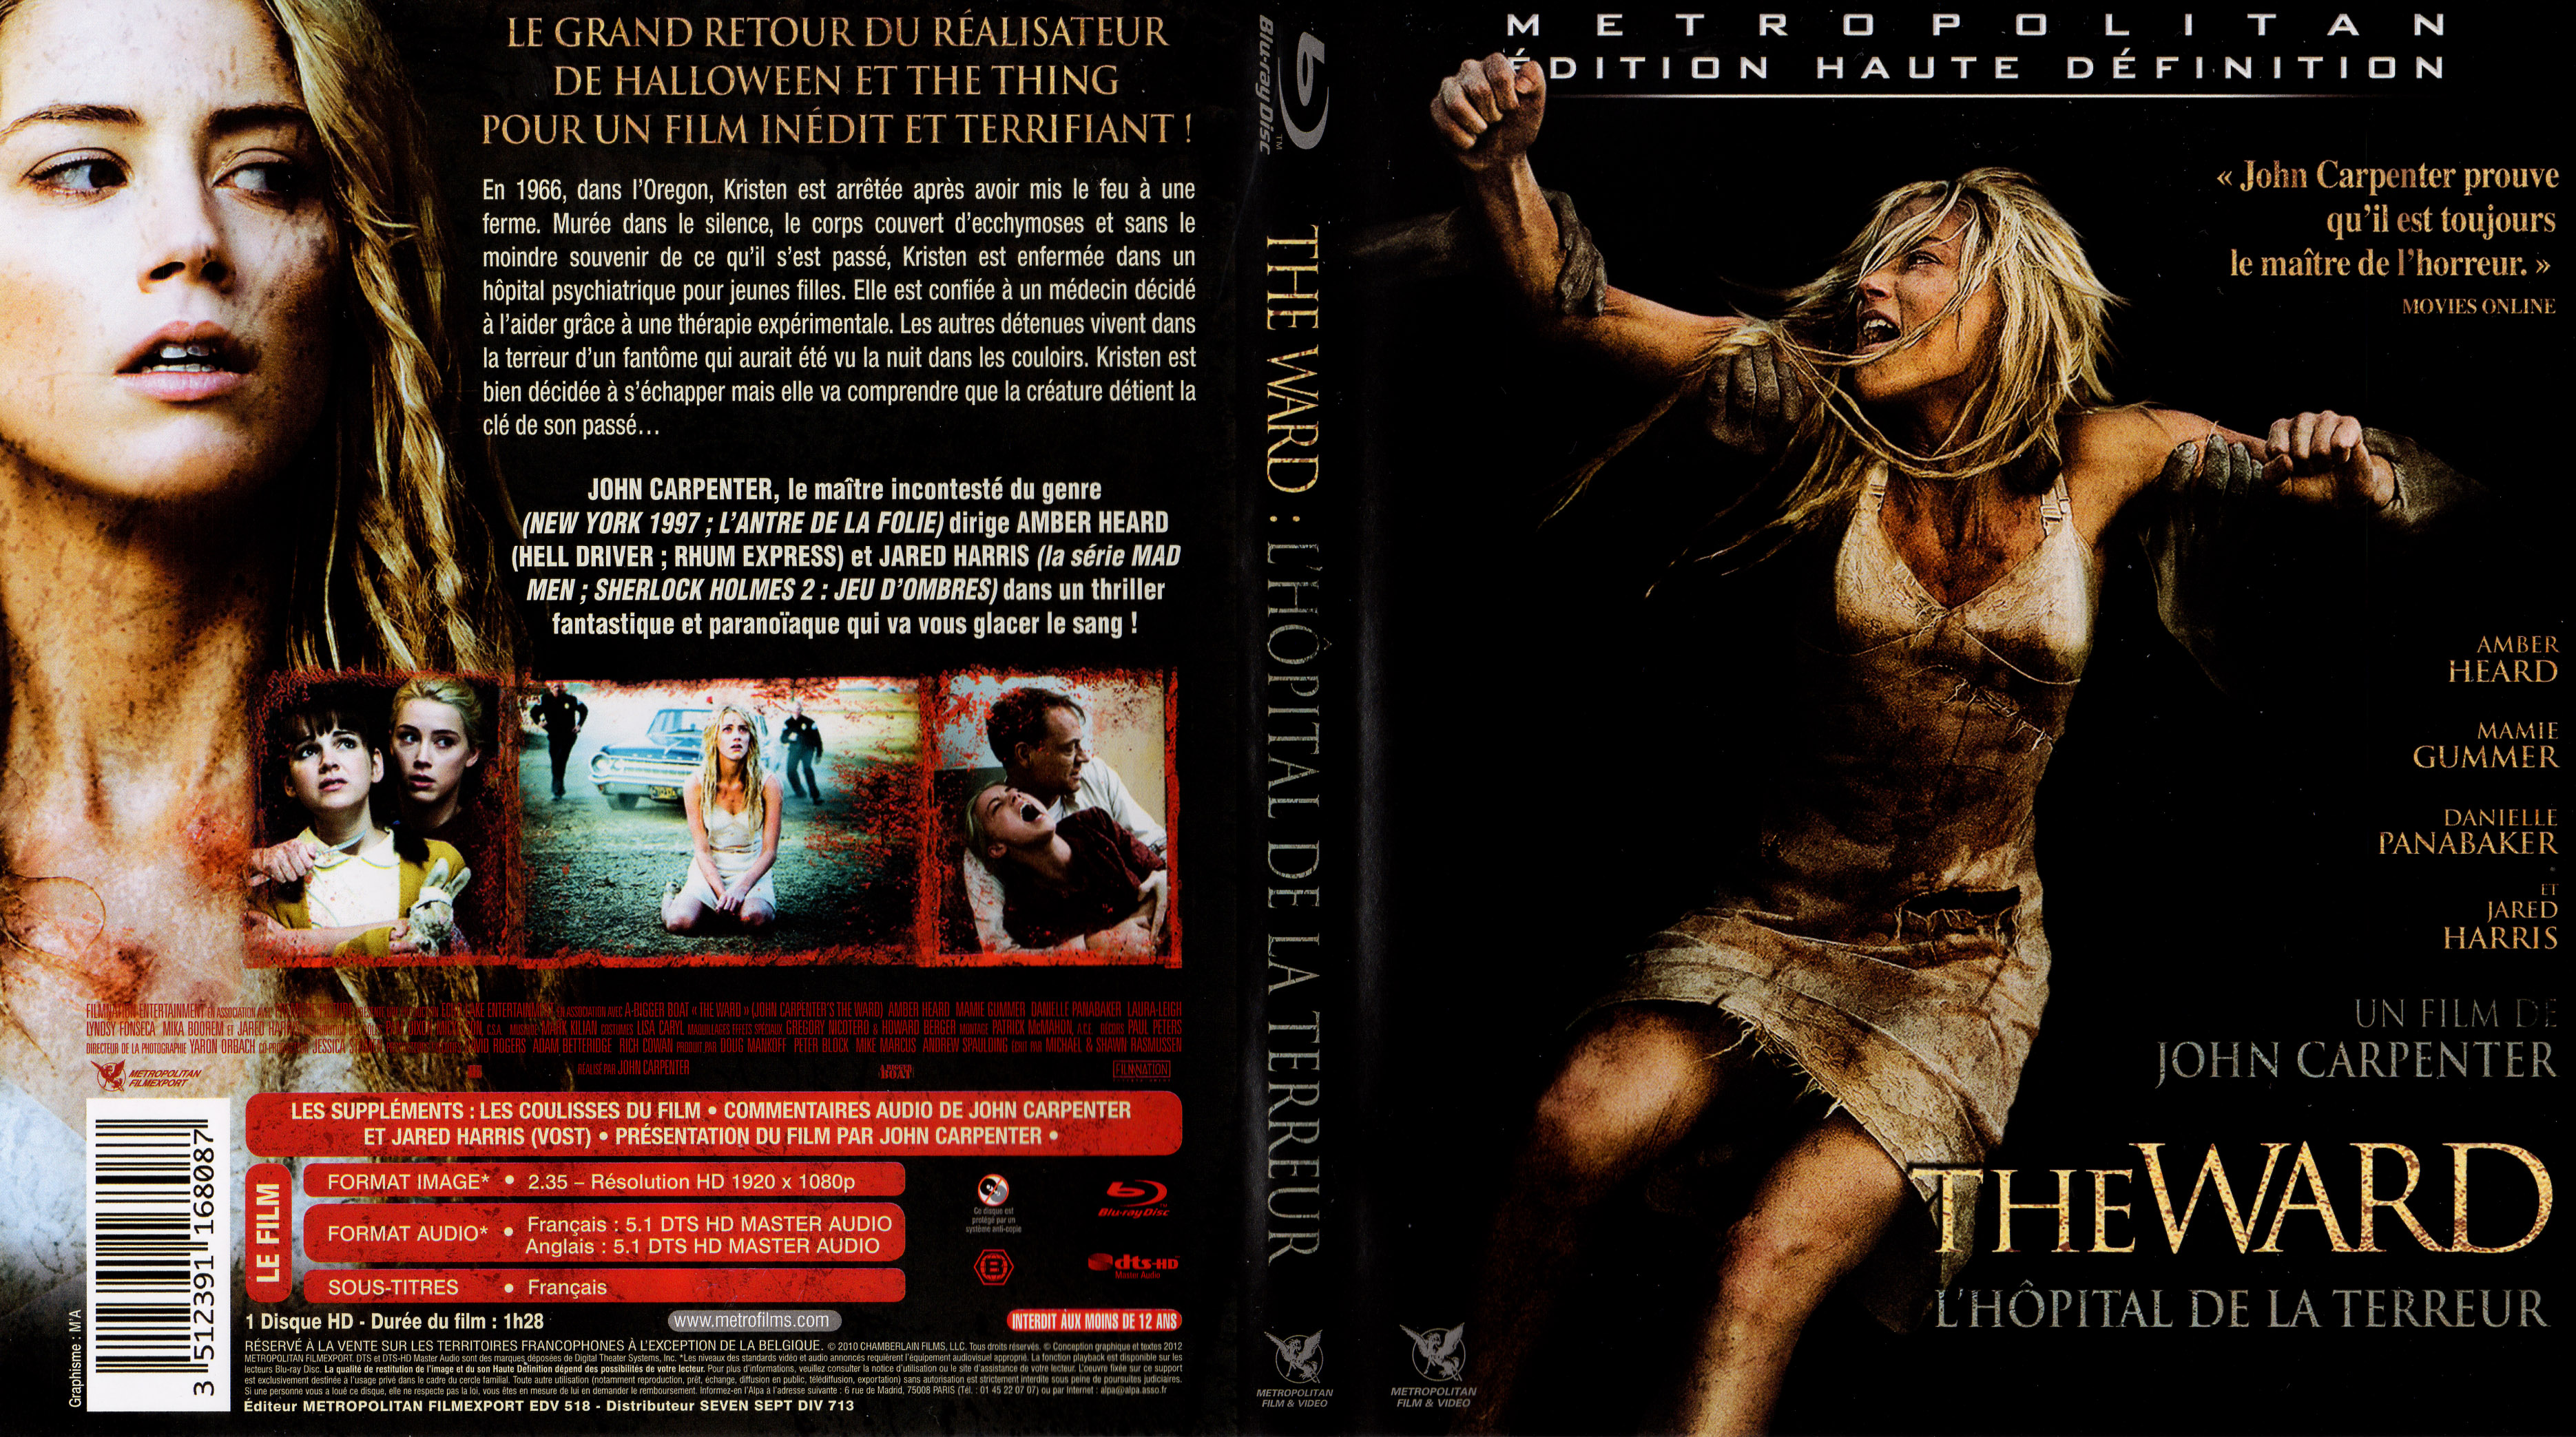 Jaquette DVD The ward (BLU-RAY)